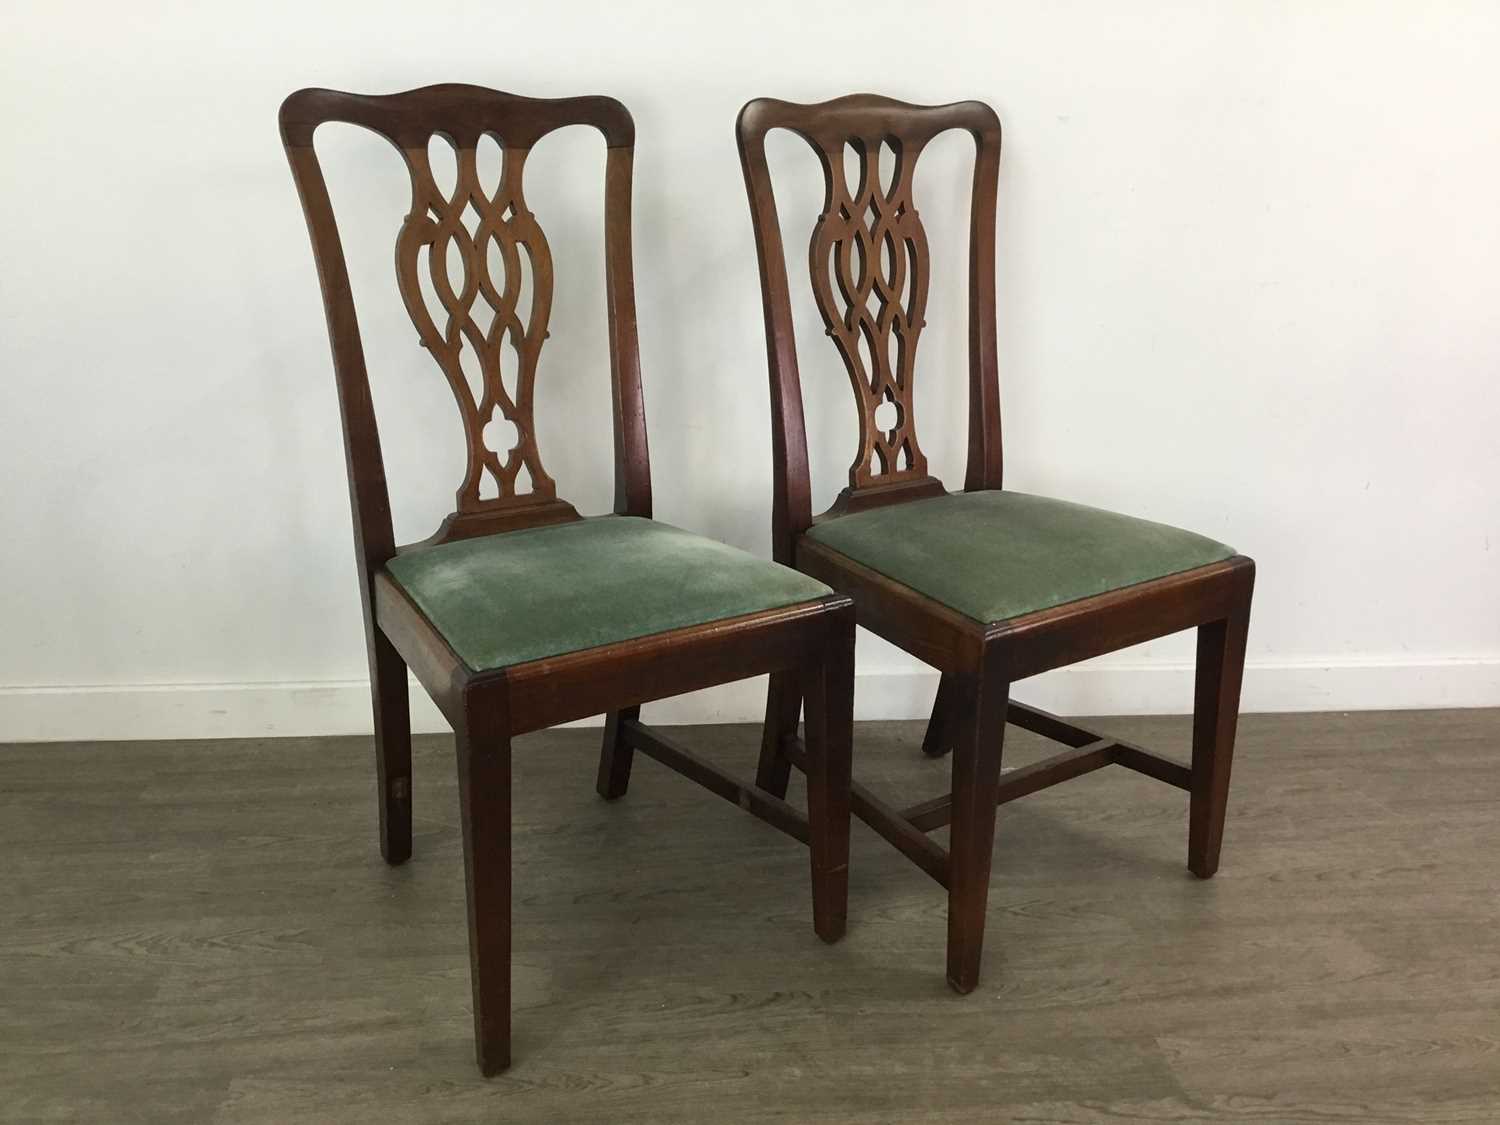 A SET OF SIX CHIPPENDALE STYLE MAHOGANY DINING CHAIRS - Image 2 of 3